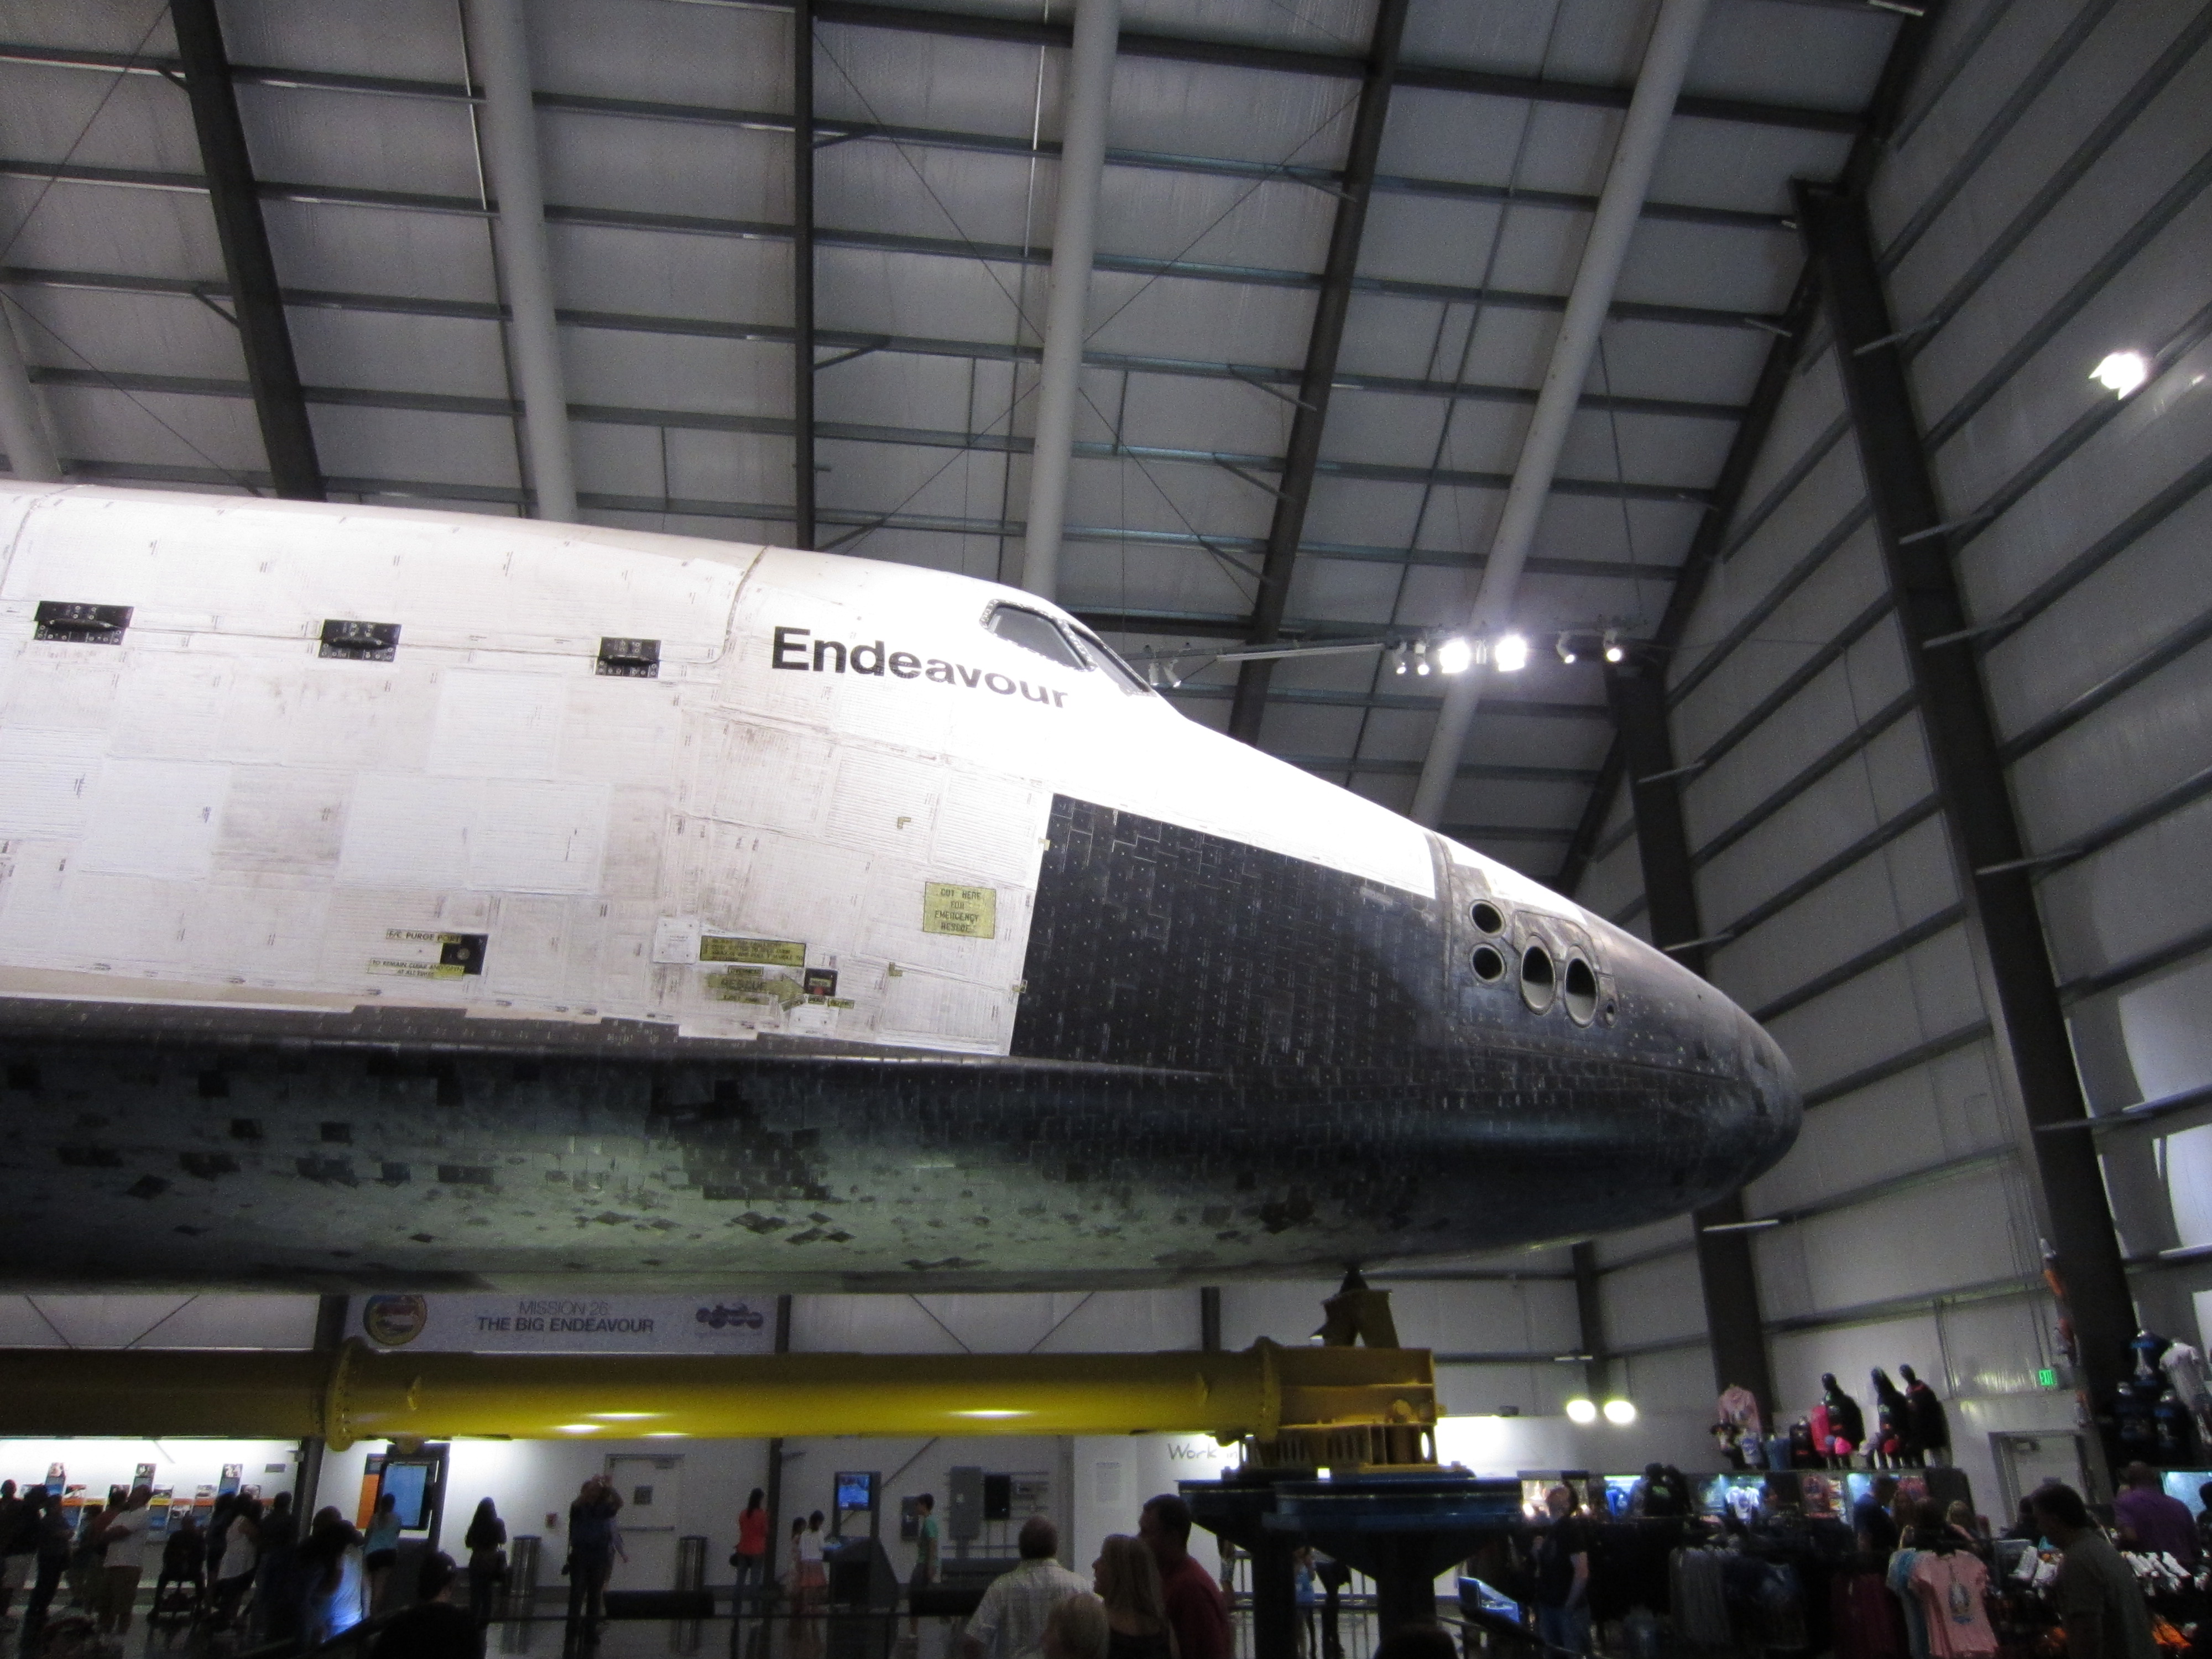 endeavour space shuttle thrusters